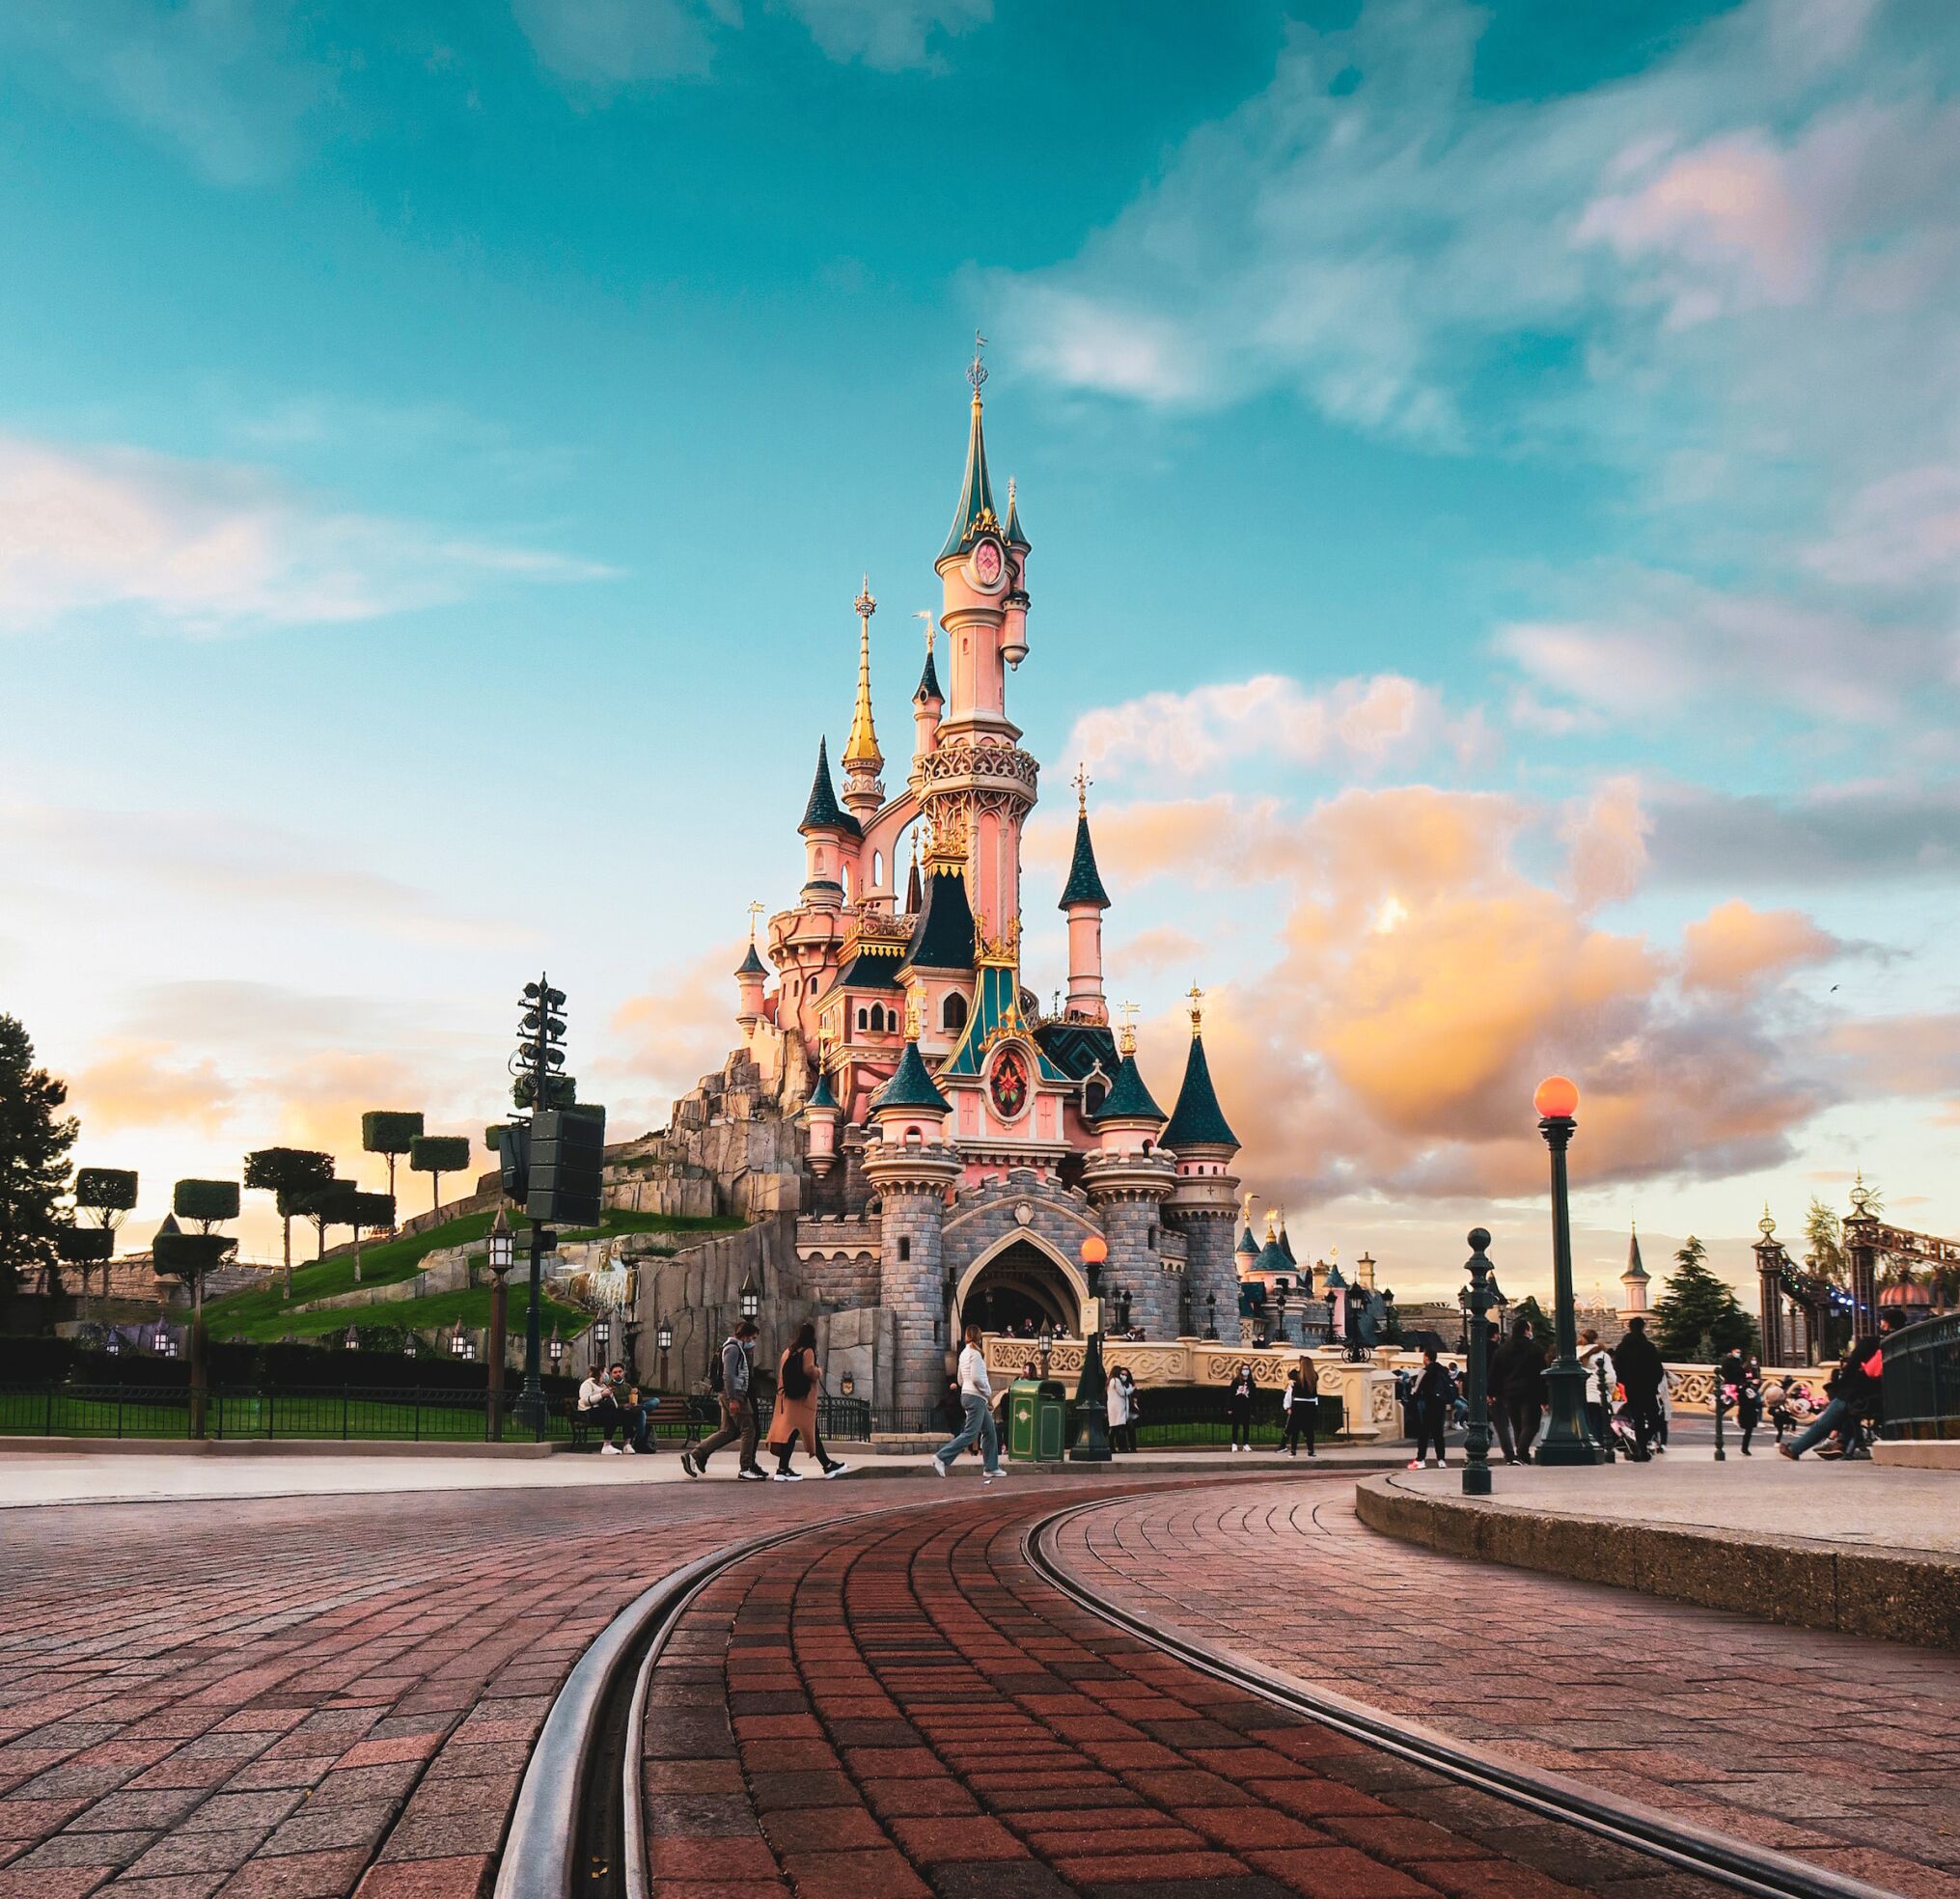 Disneyland Paris: What you need to know to prepare your trip